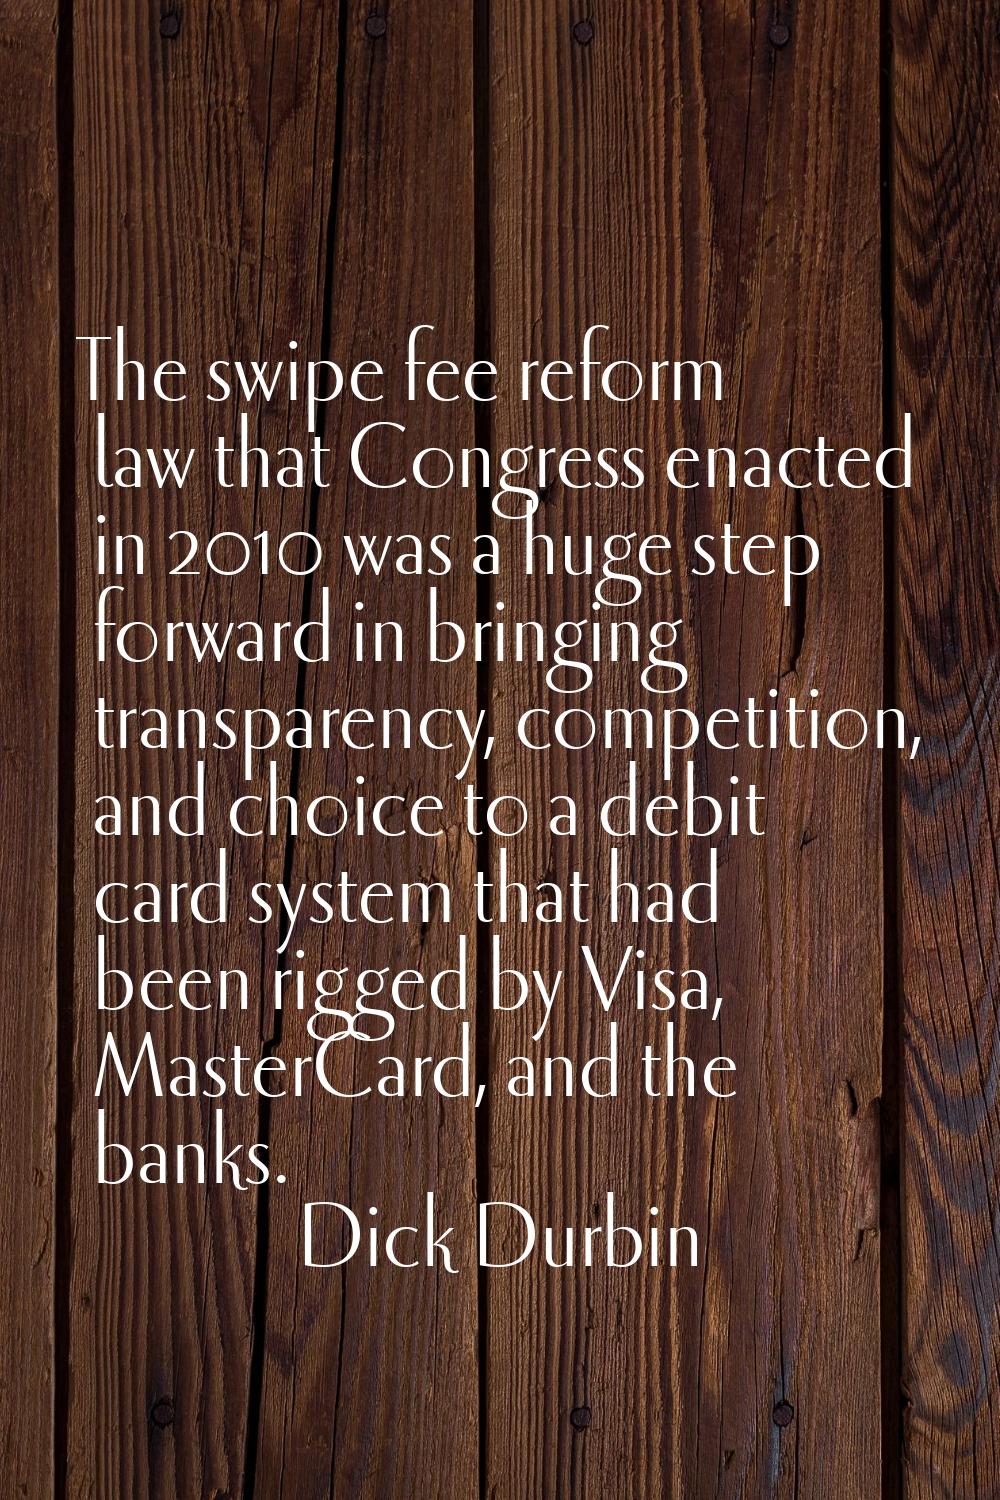 The swipe fee reform law that Congress enacted in 2010 was a huge step forward in bringing transpar